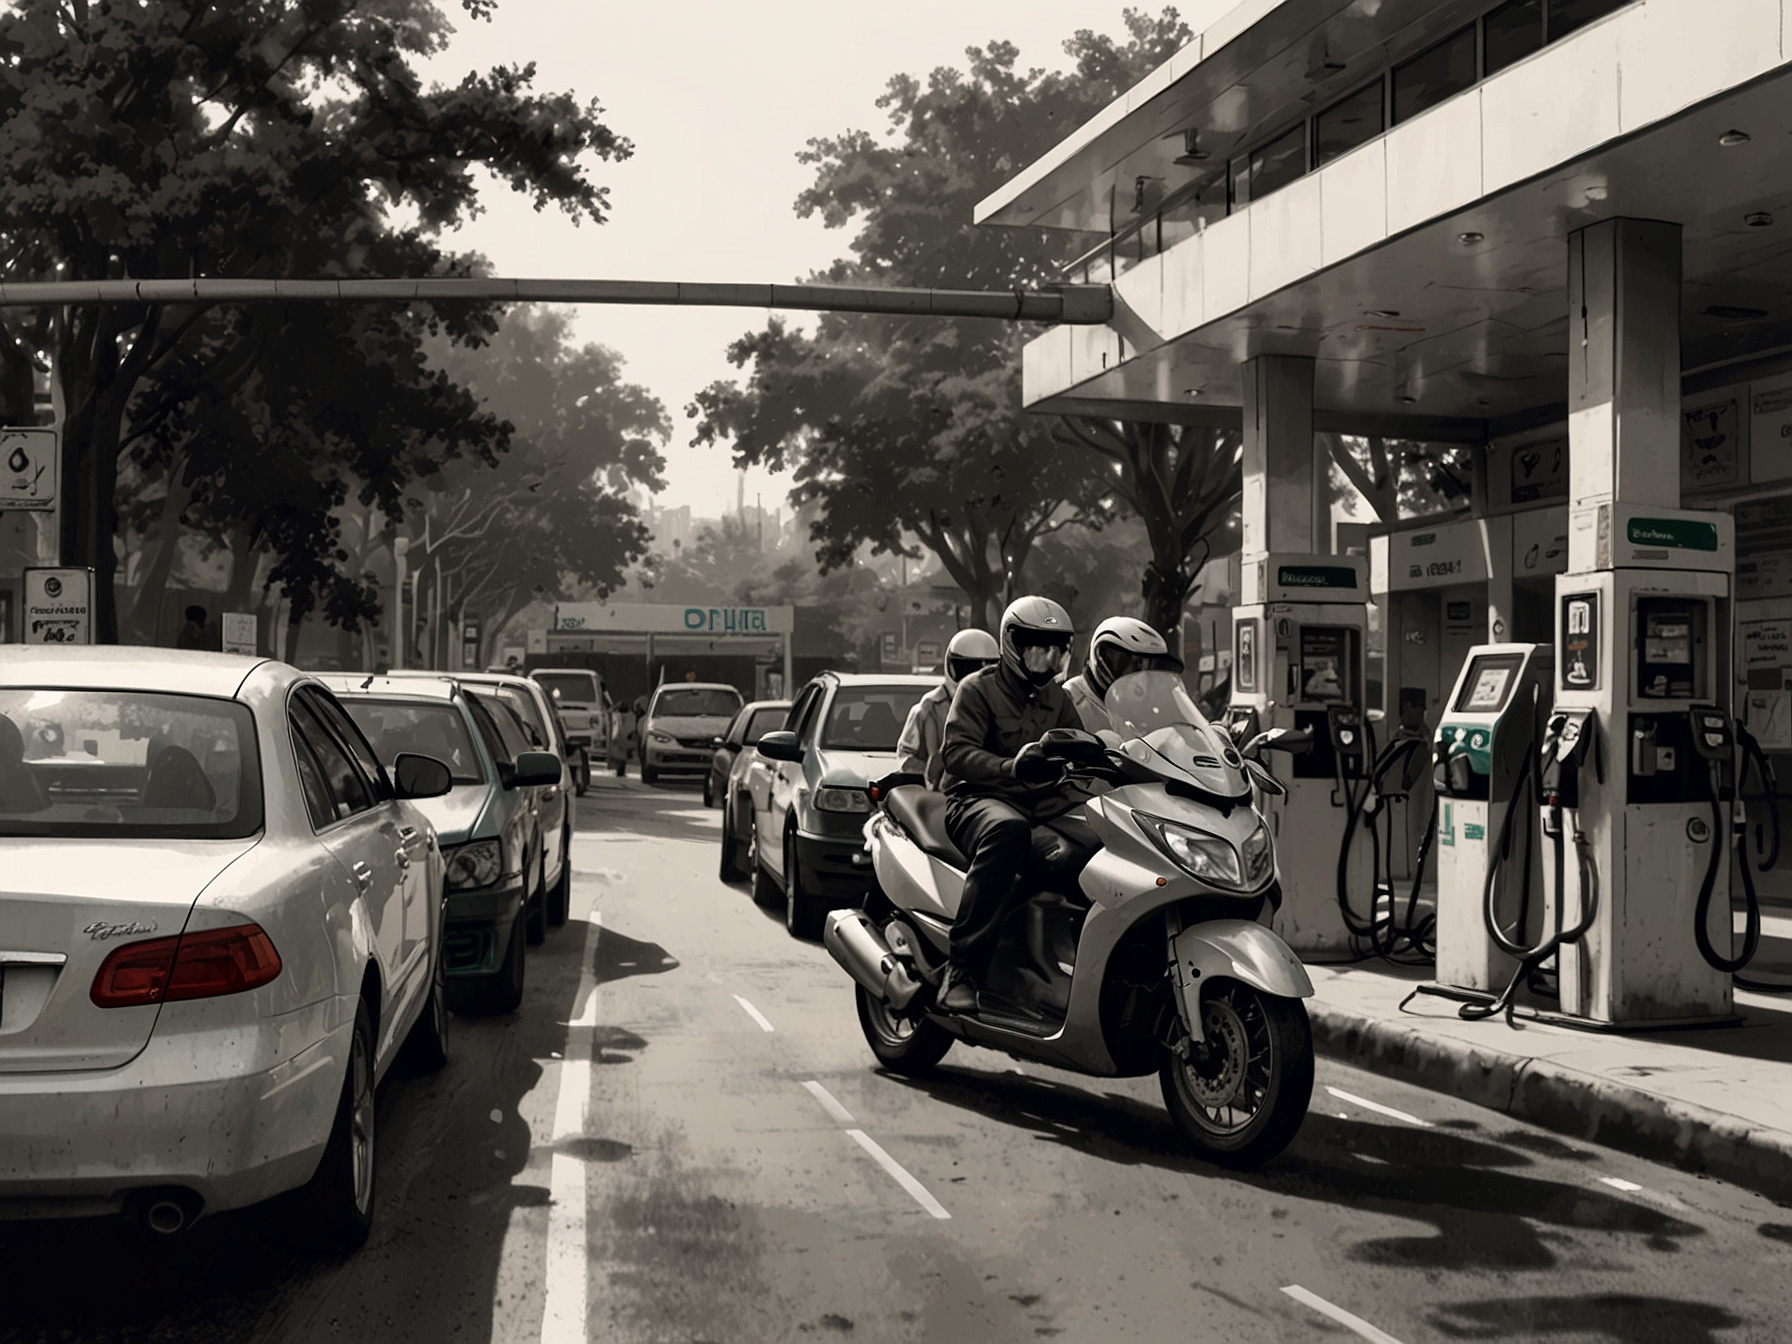 A busy fuel station in an Indian city with cars and bikes lining up for refueling, reflecting the everyday impact of current petrol and diesel prices on commuters.